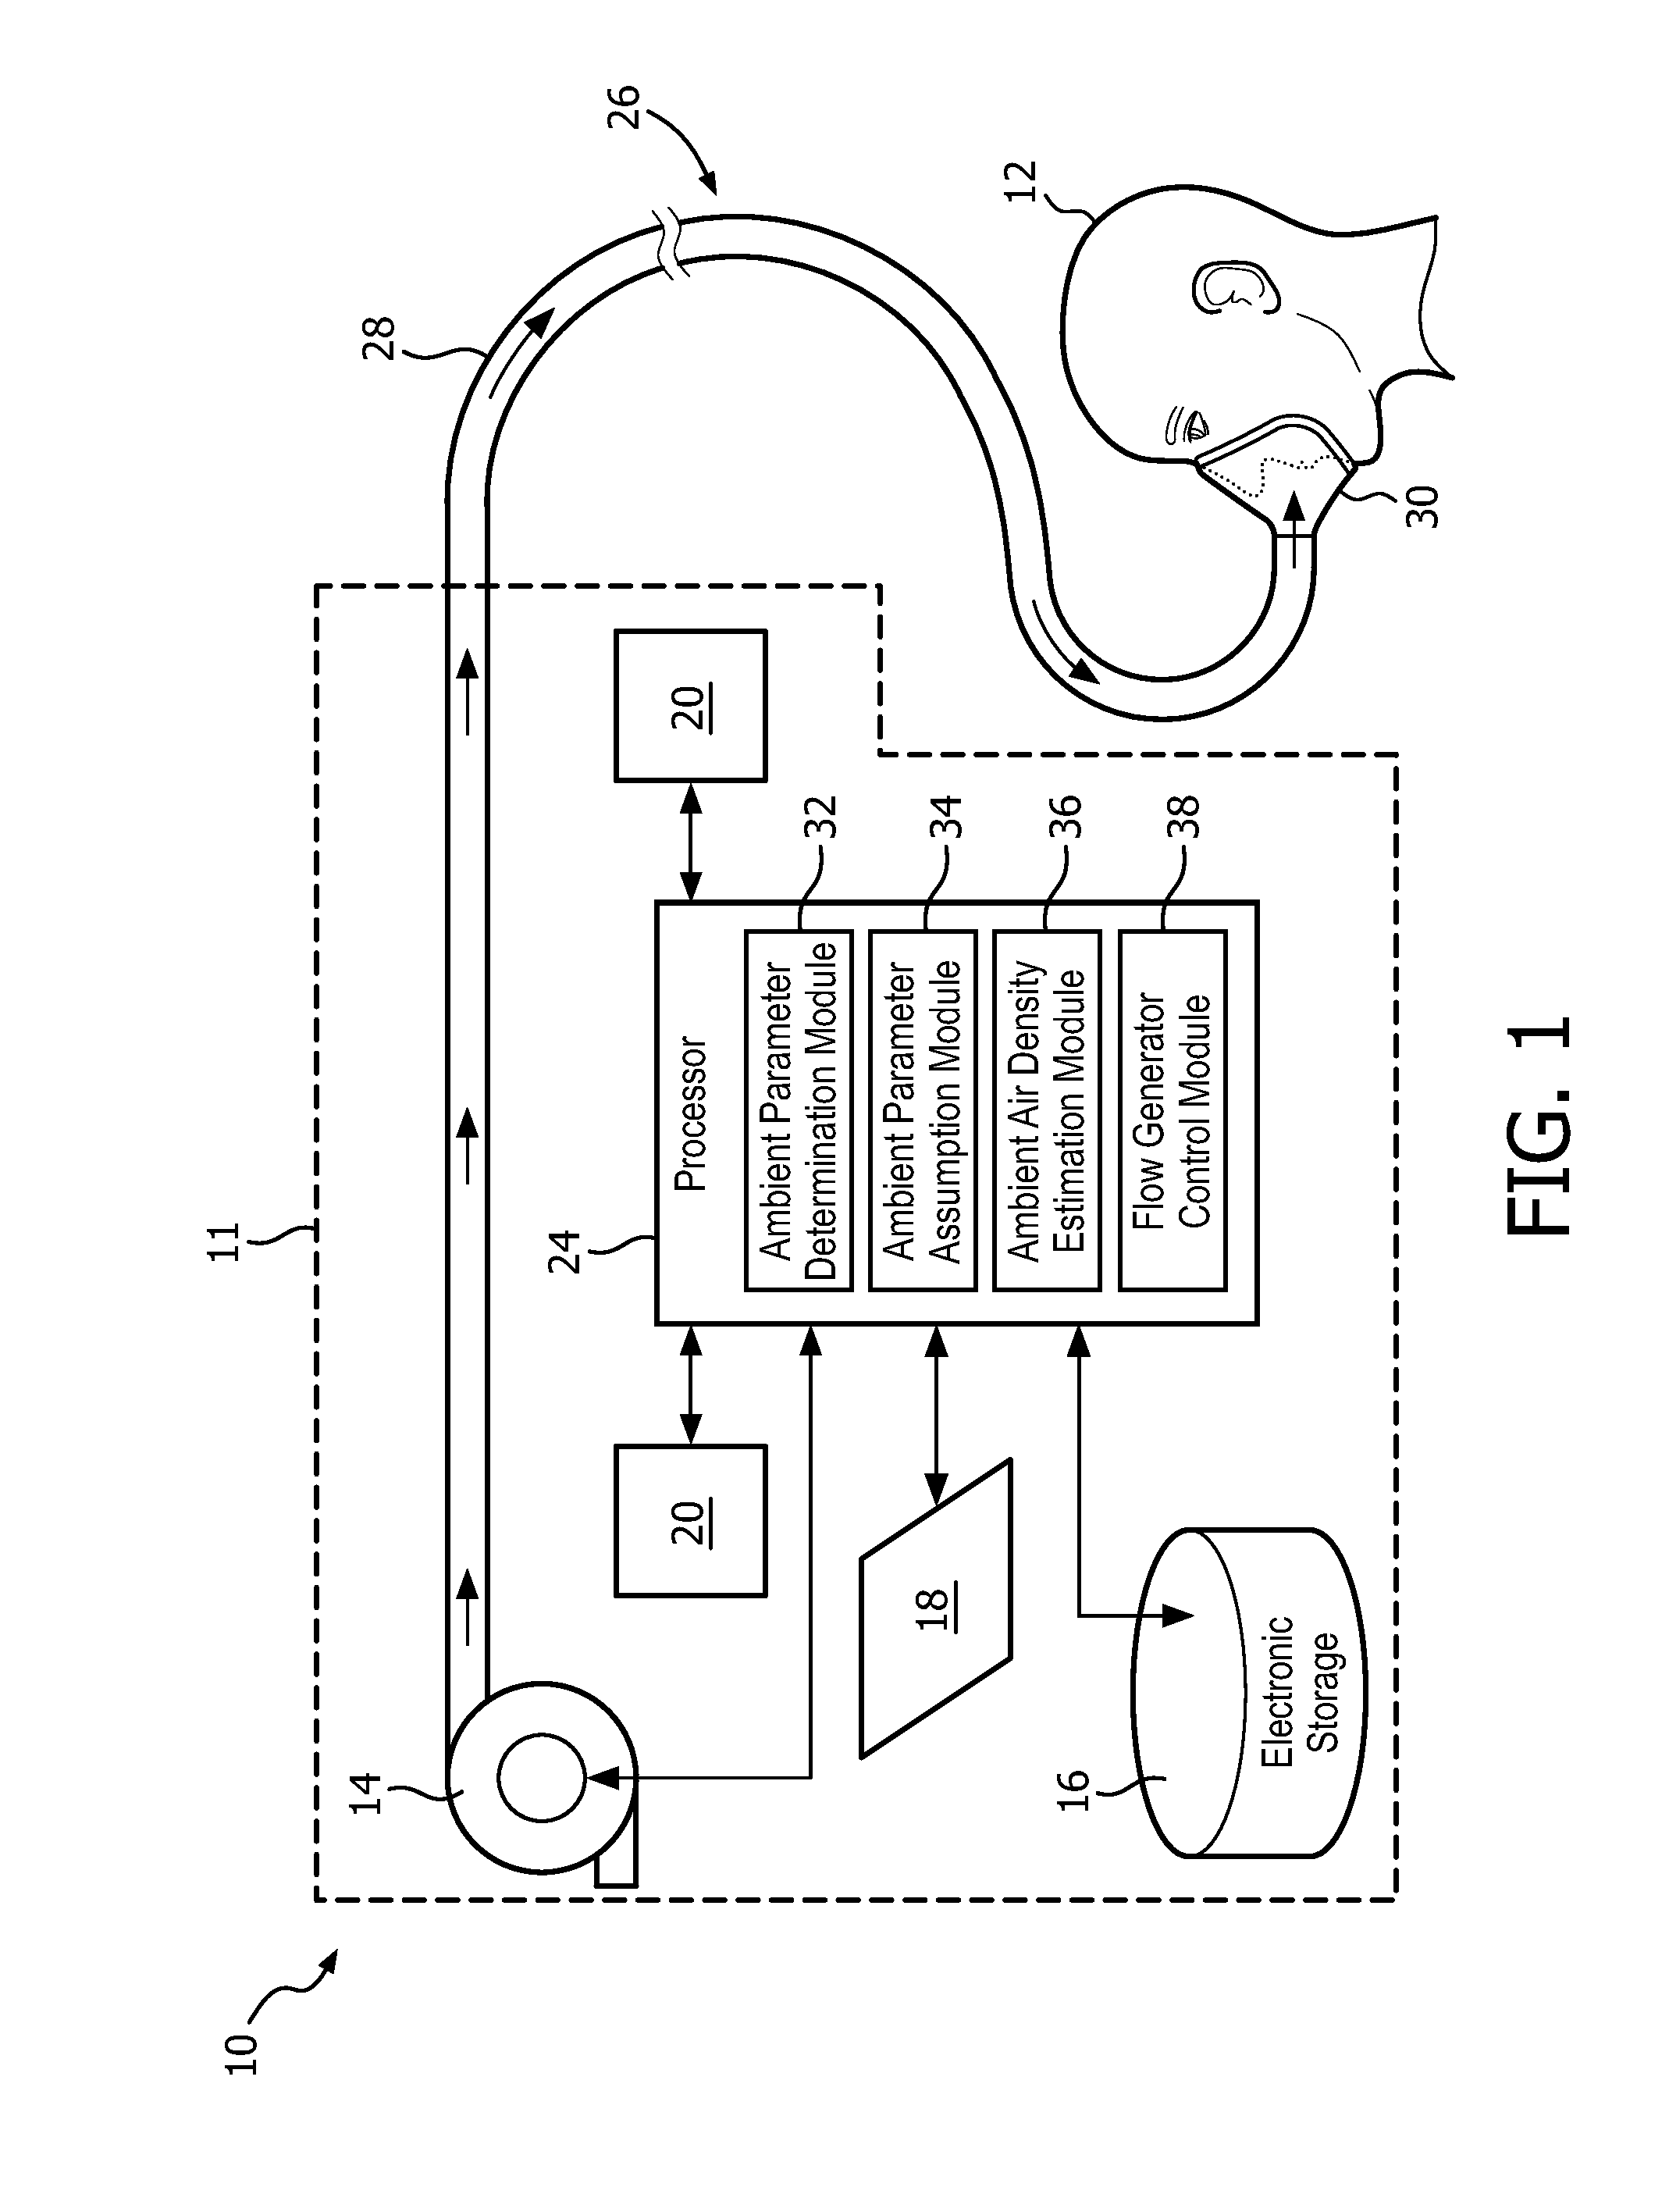 Compensating for variations in air density in a pressure support device